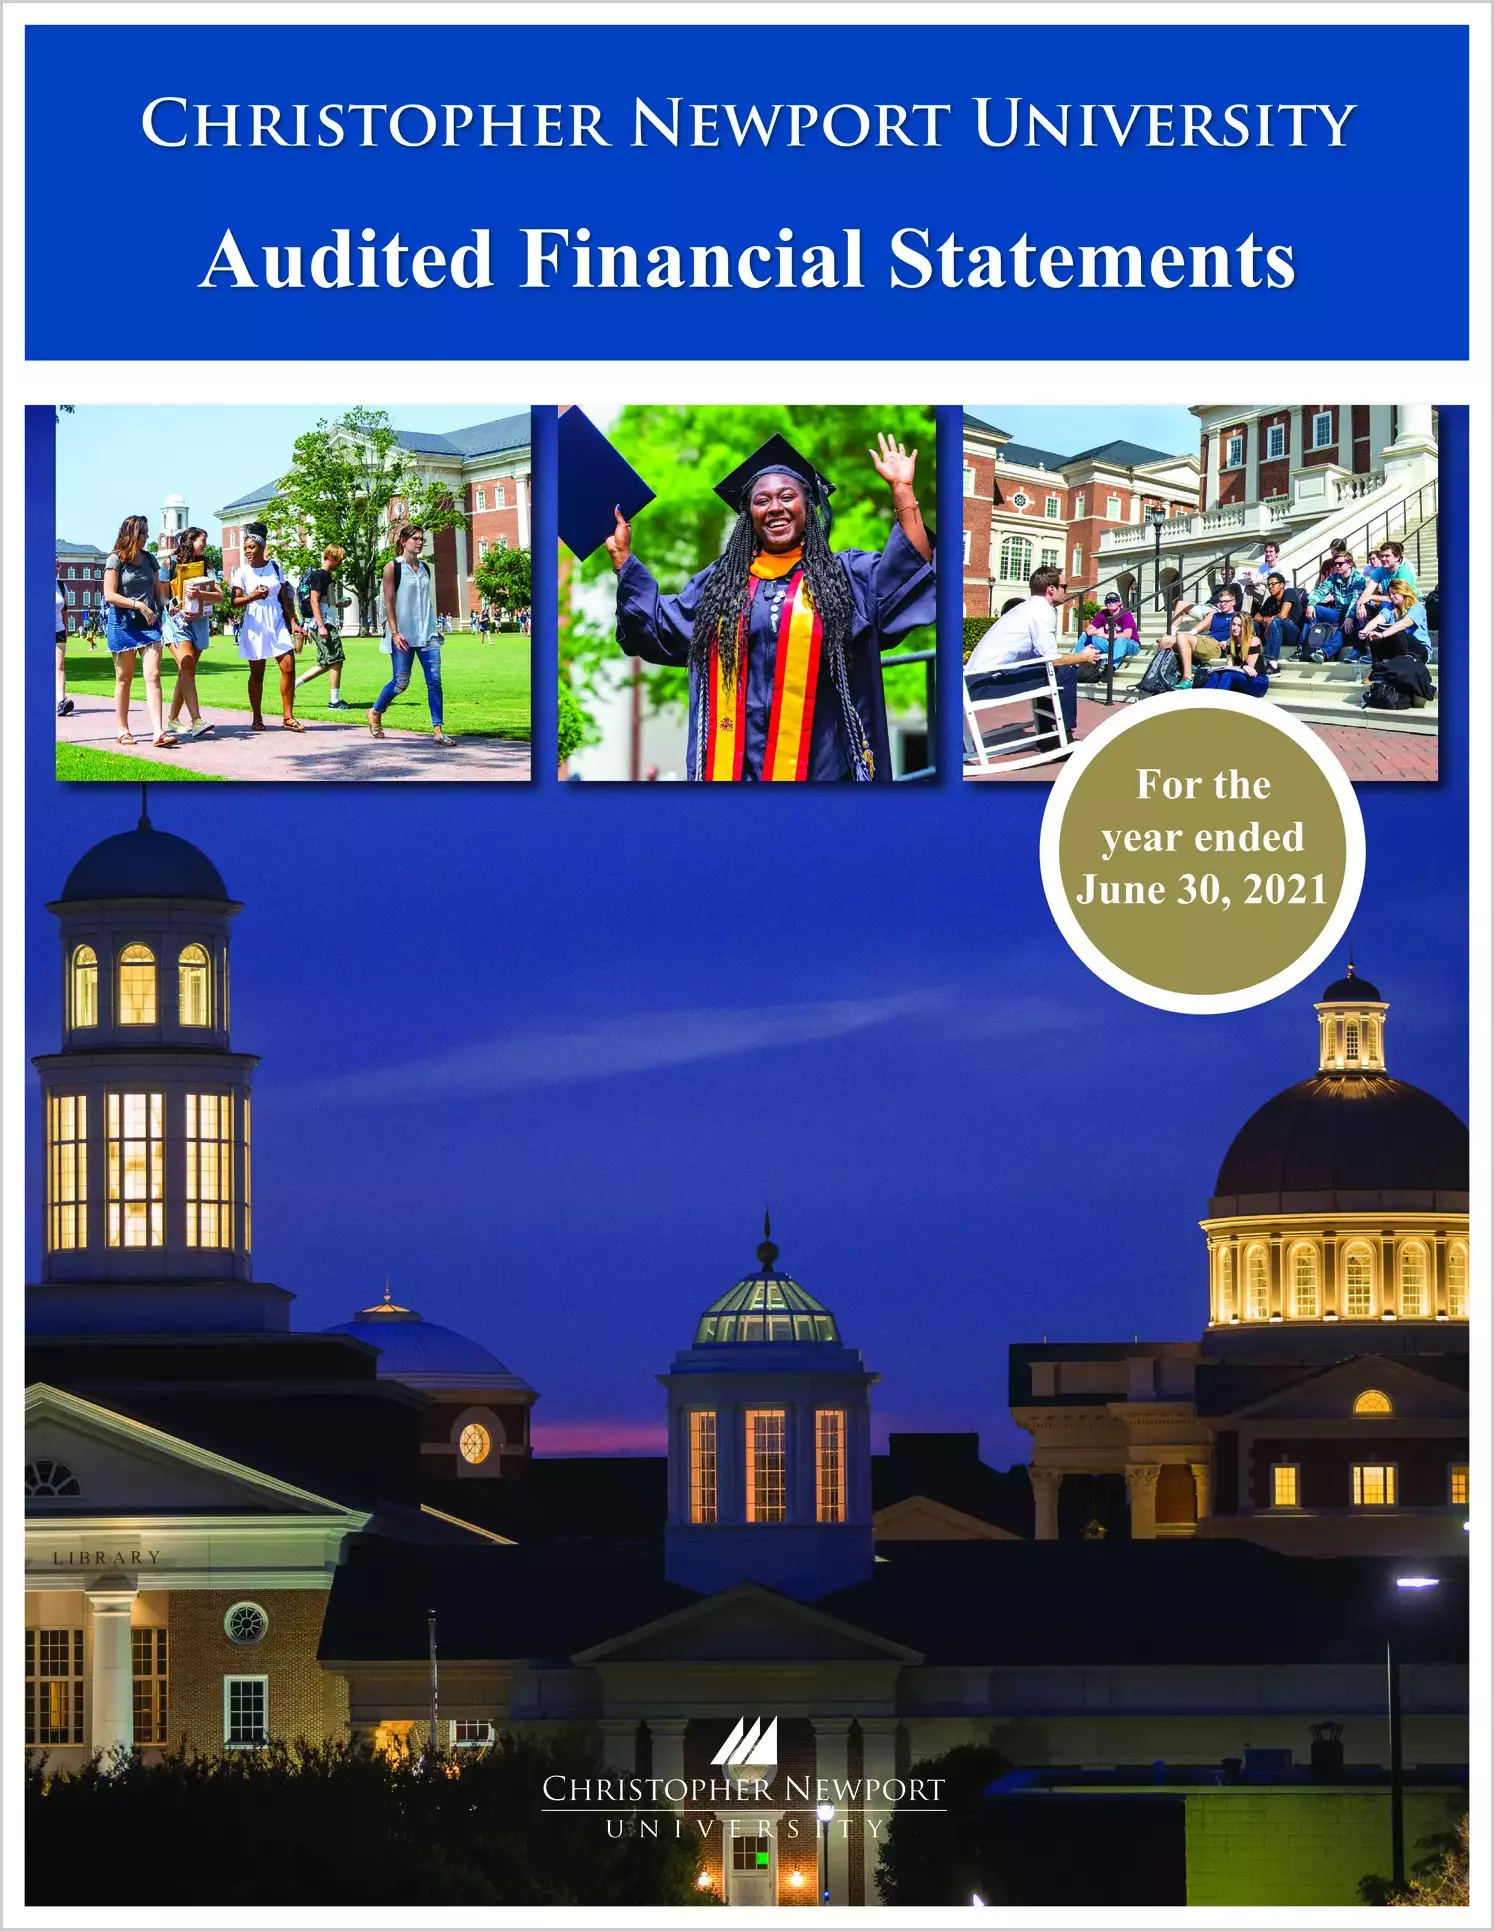 Christopher Newport University Financial Statements for the year ended June 30, 2021